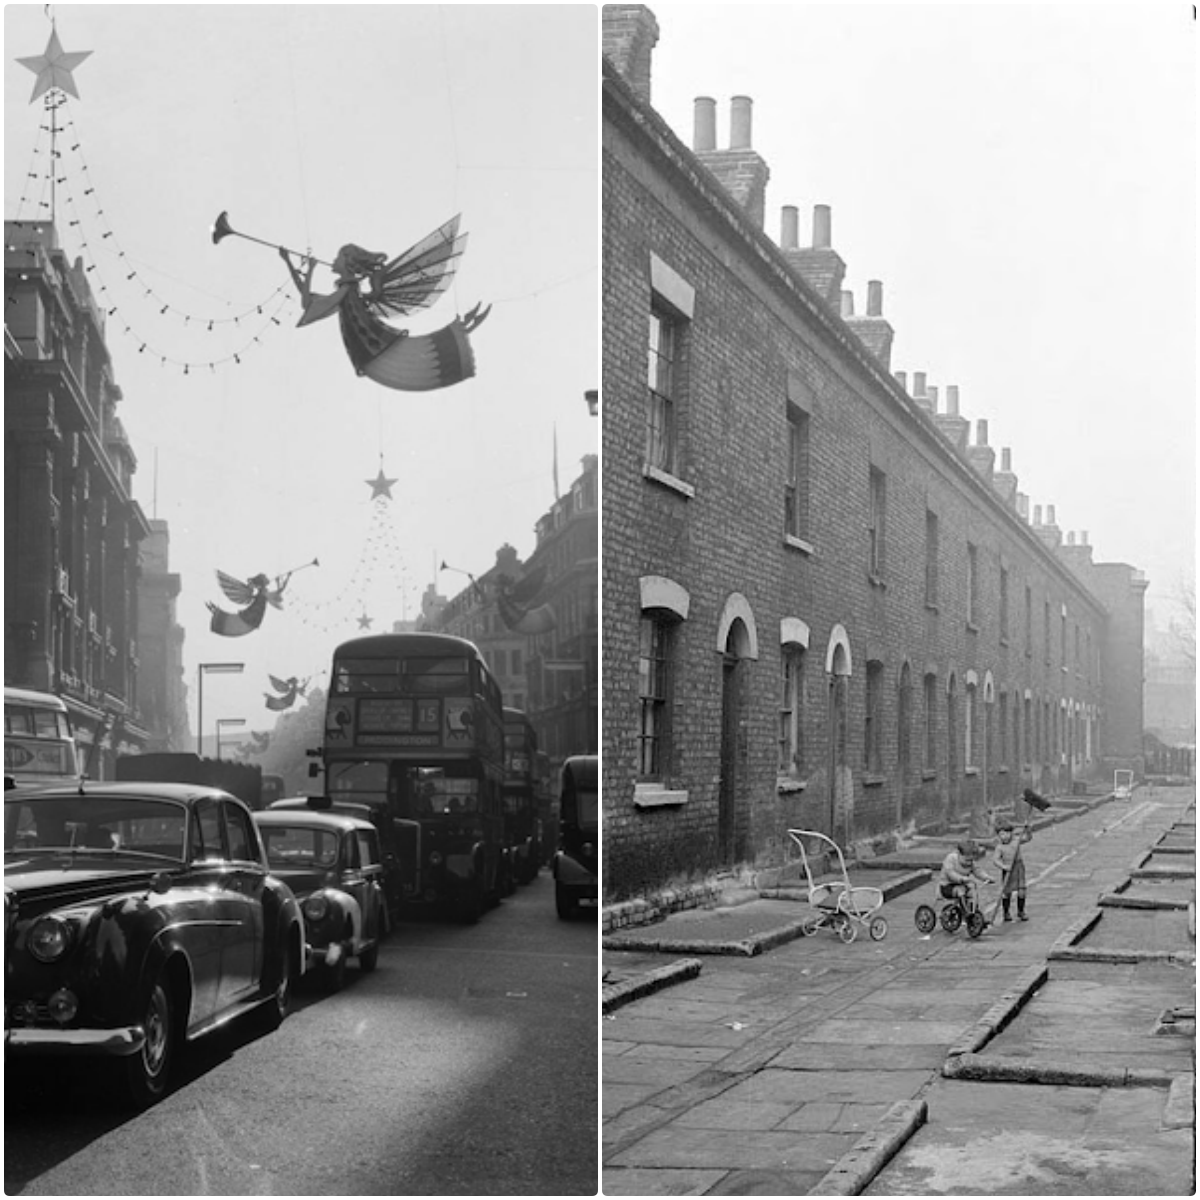 Everyday Life in England During the 1950s-60s Through John Gay's Lens